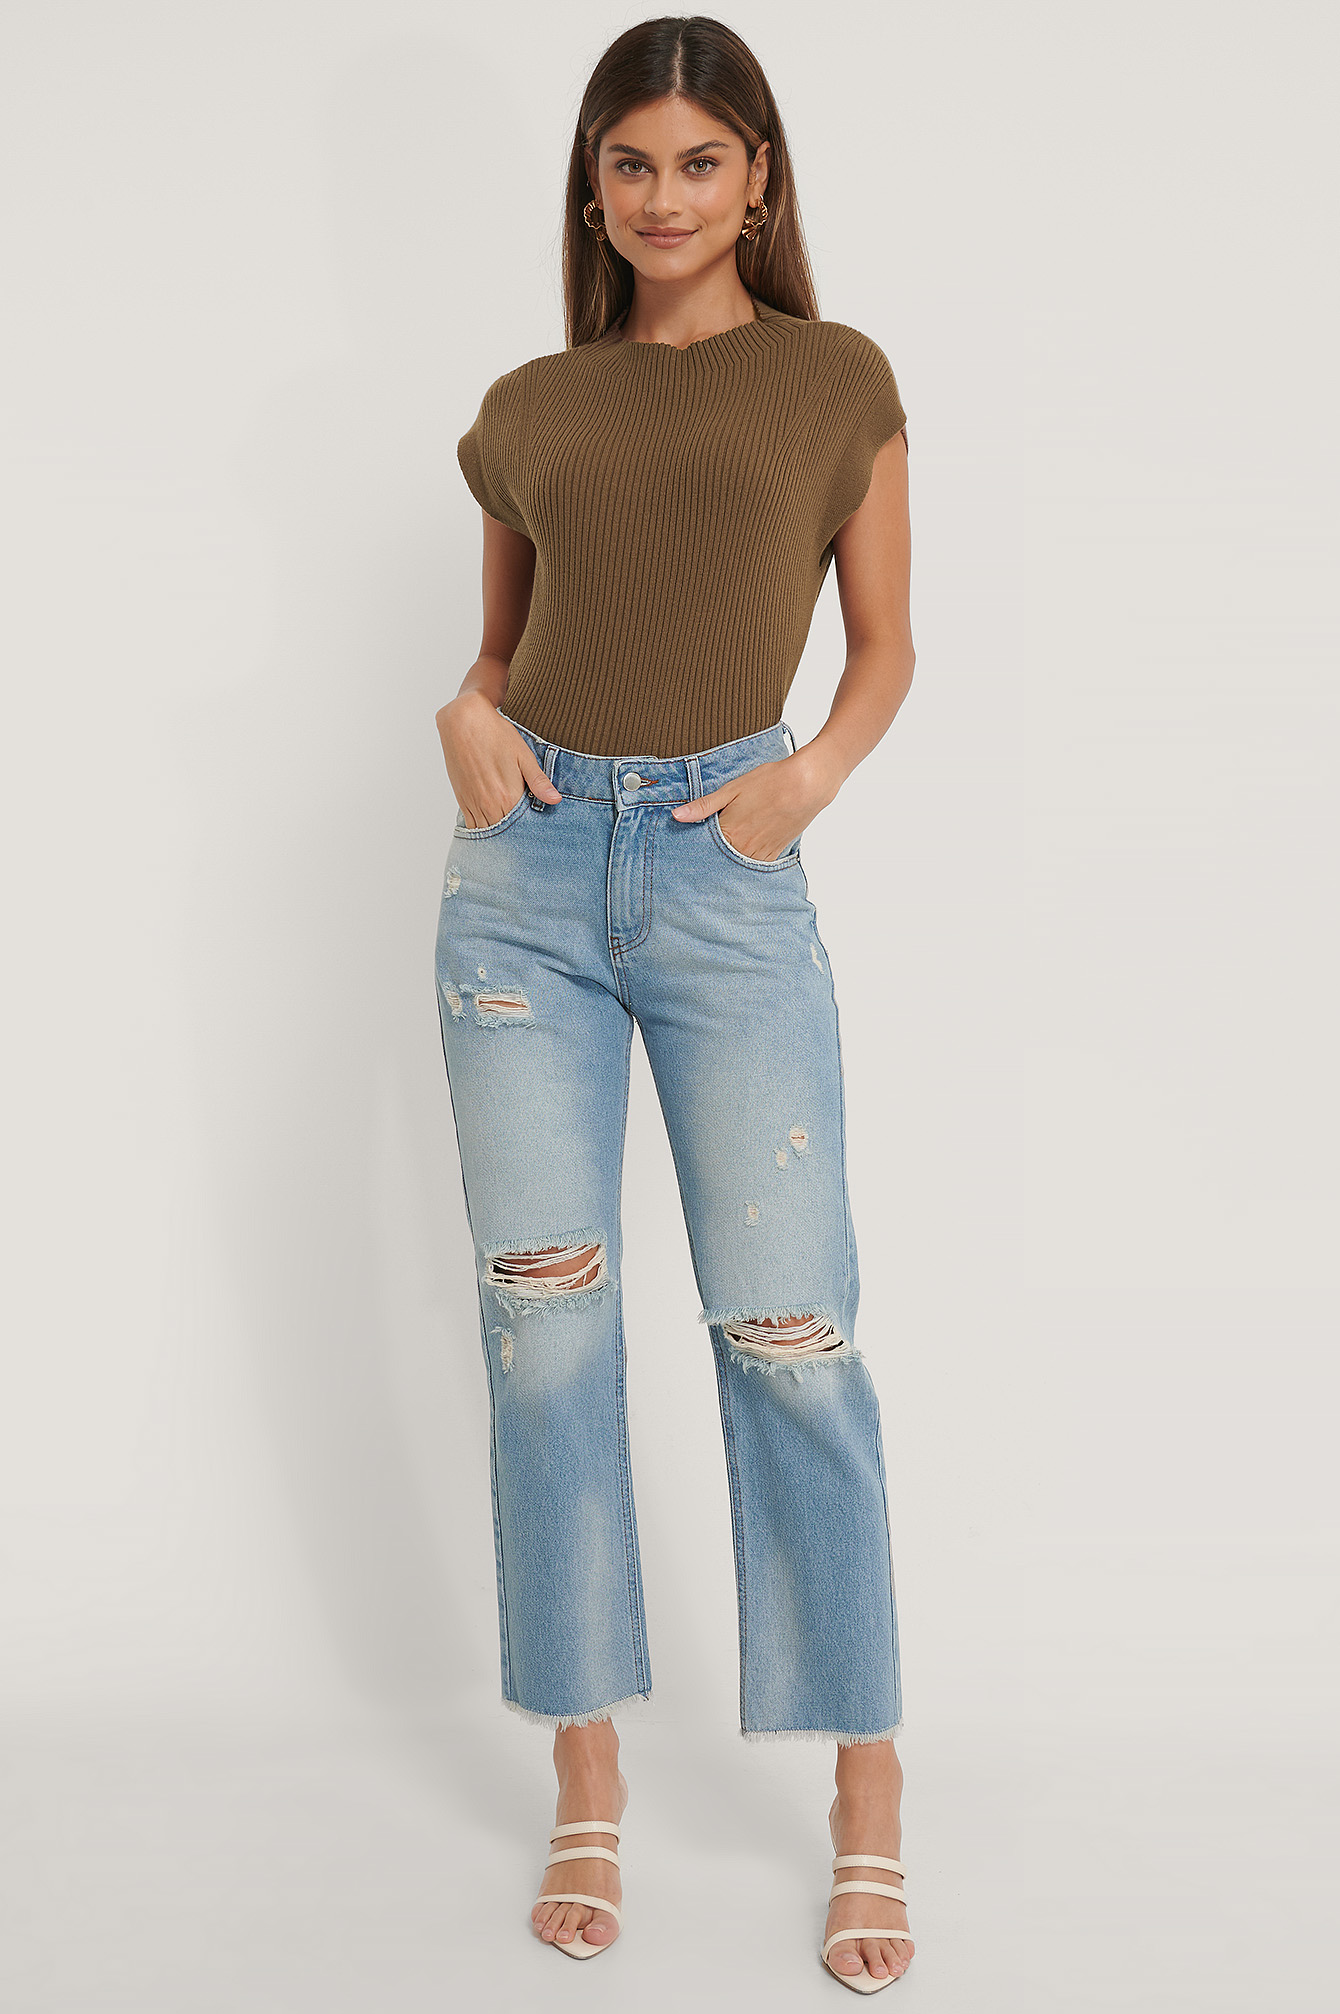 Cropped & Ankle Jeans | Women's Jeans | NA-KD